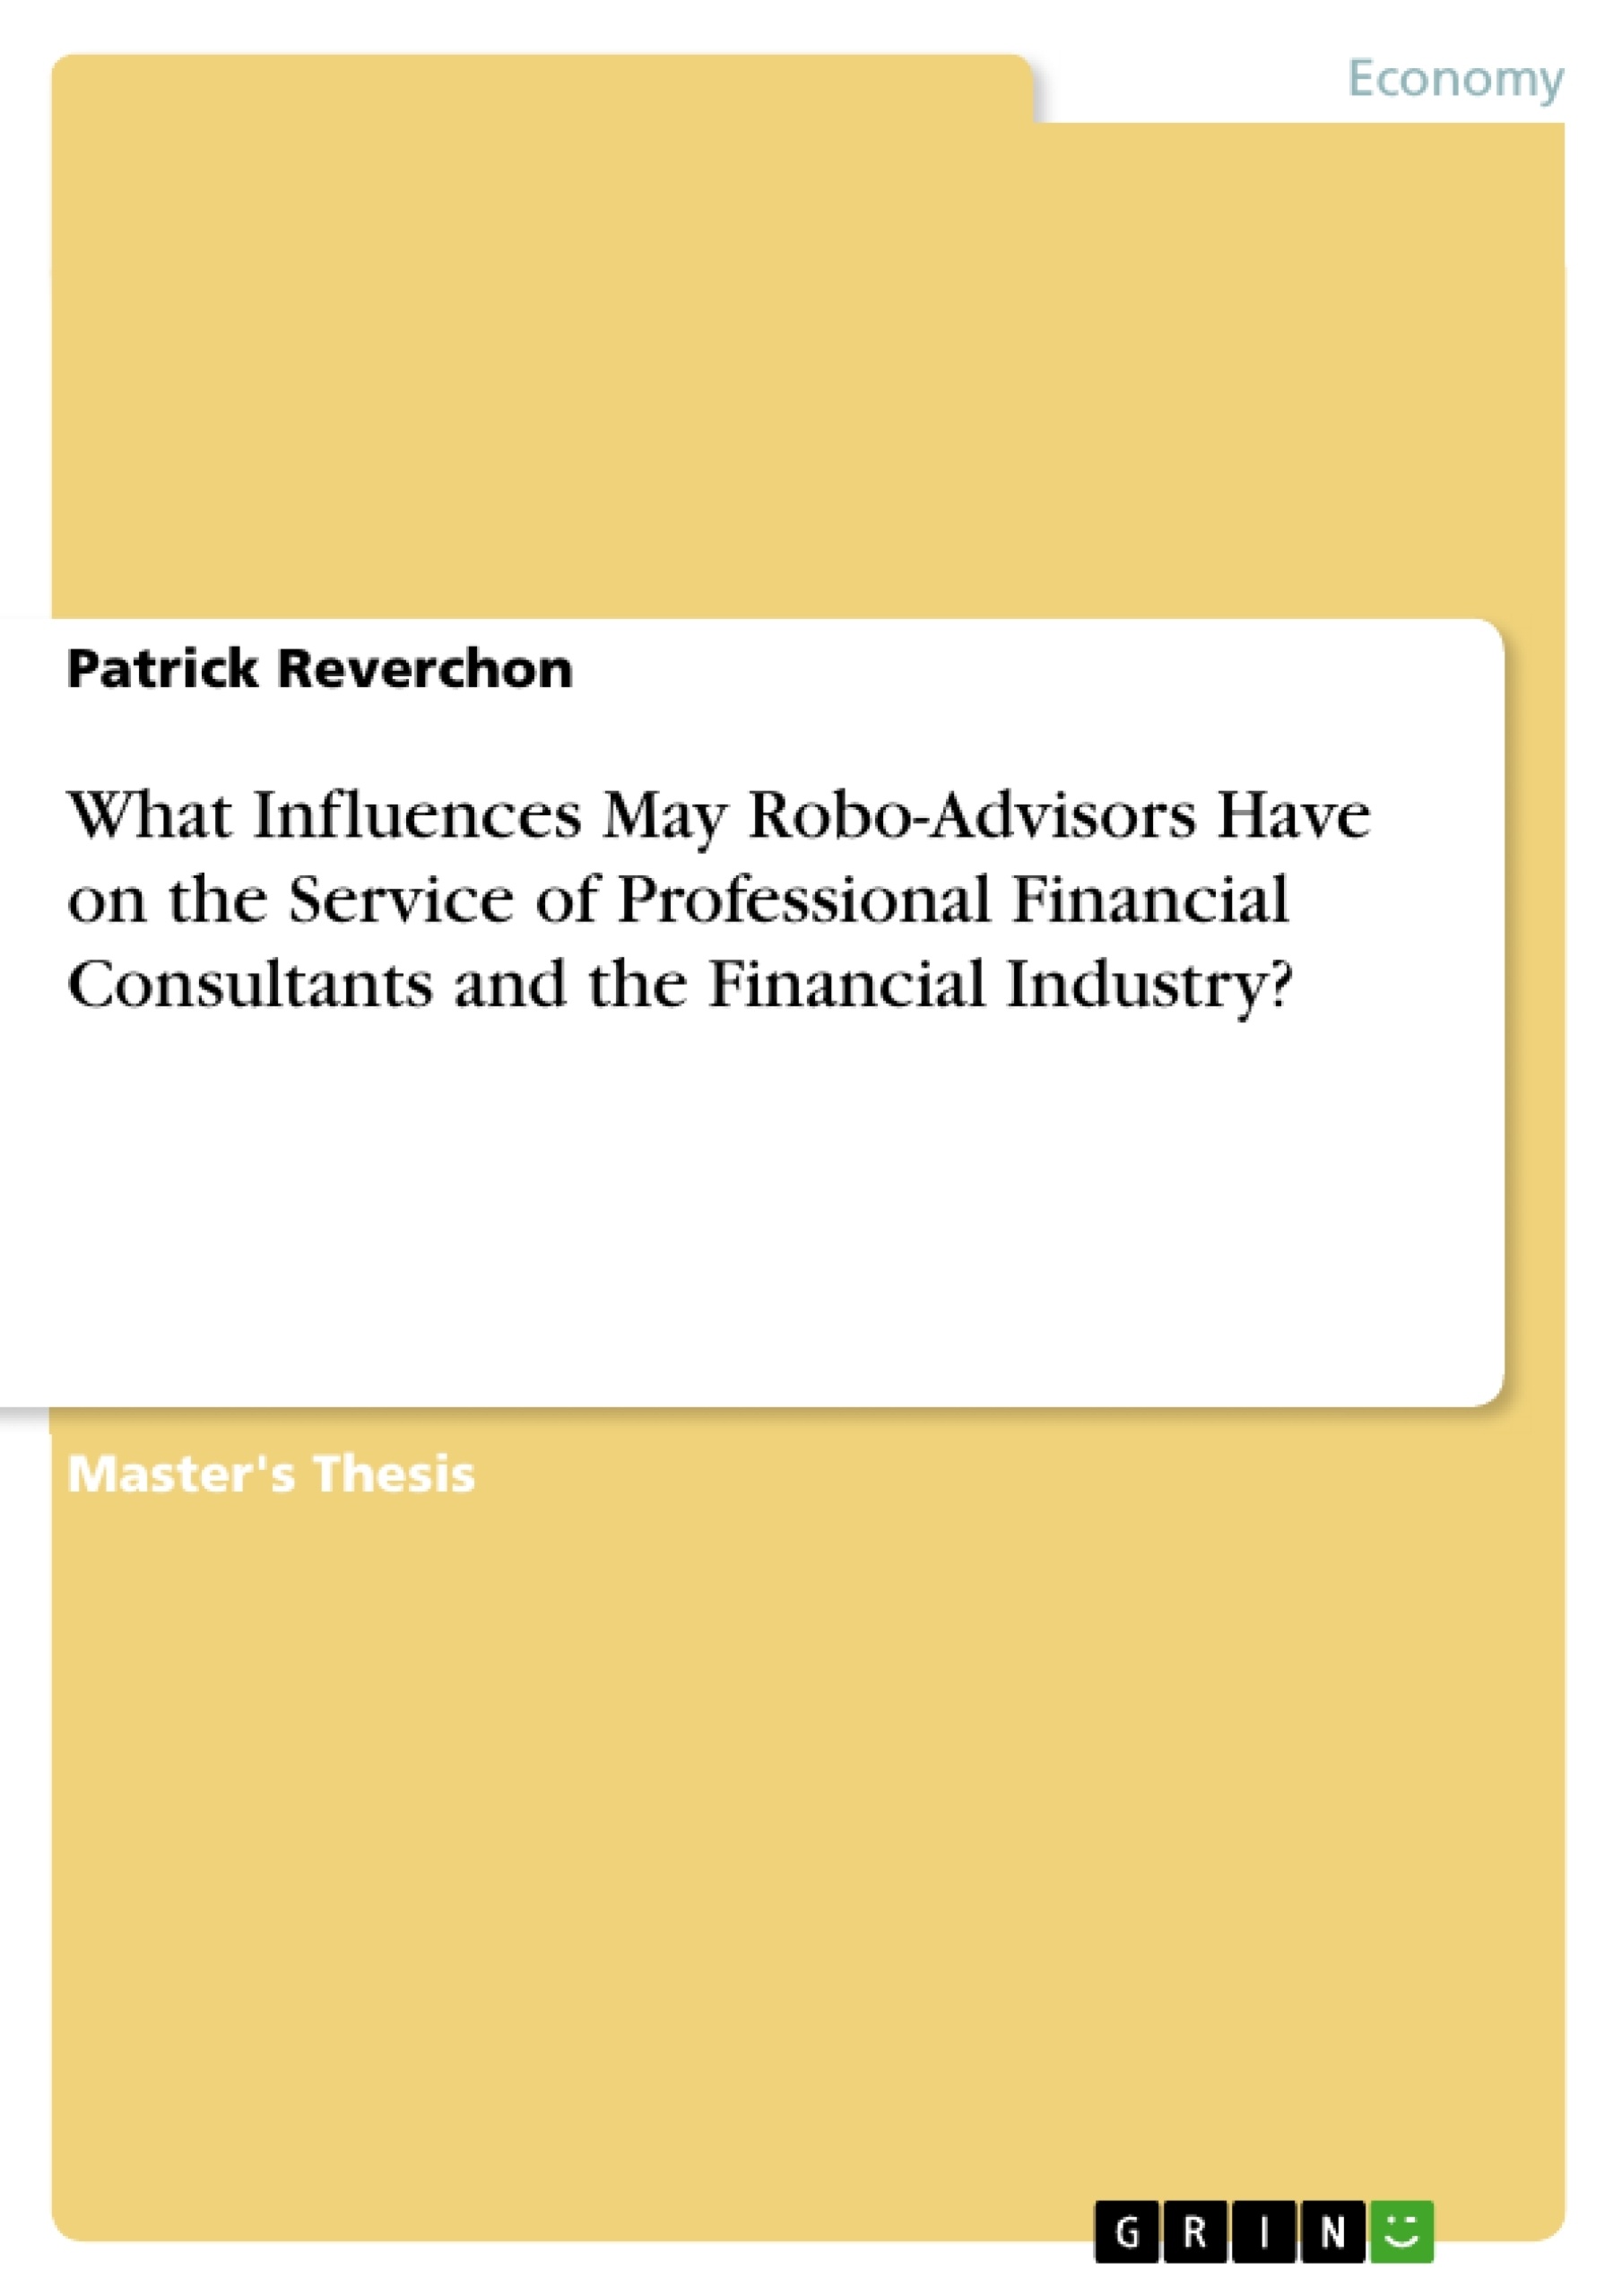 Título: What Influences May Robo-Advisors Have on the Service of Professional Financial Consultants and the Financial Industry?